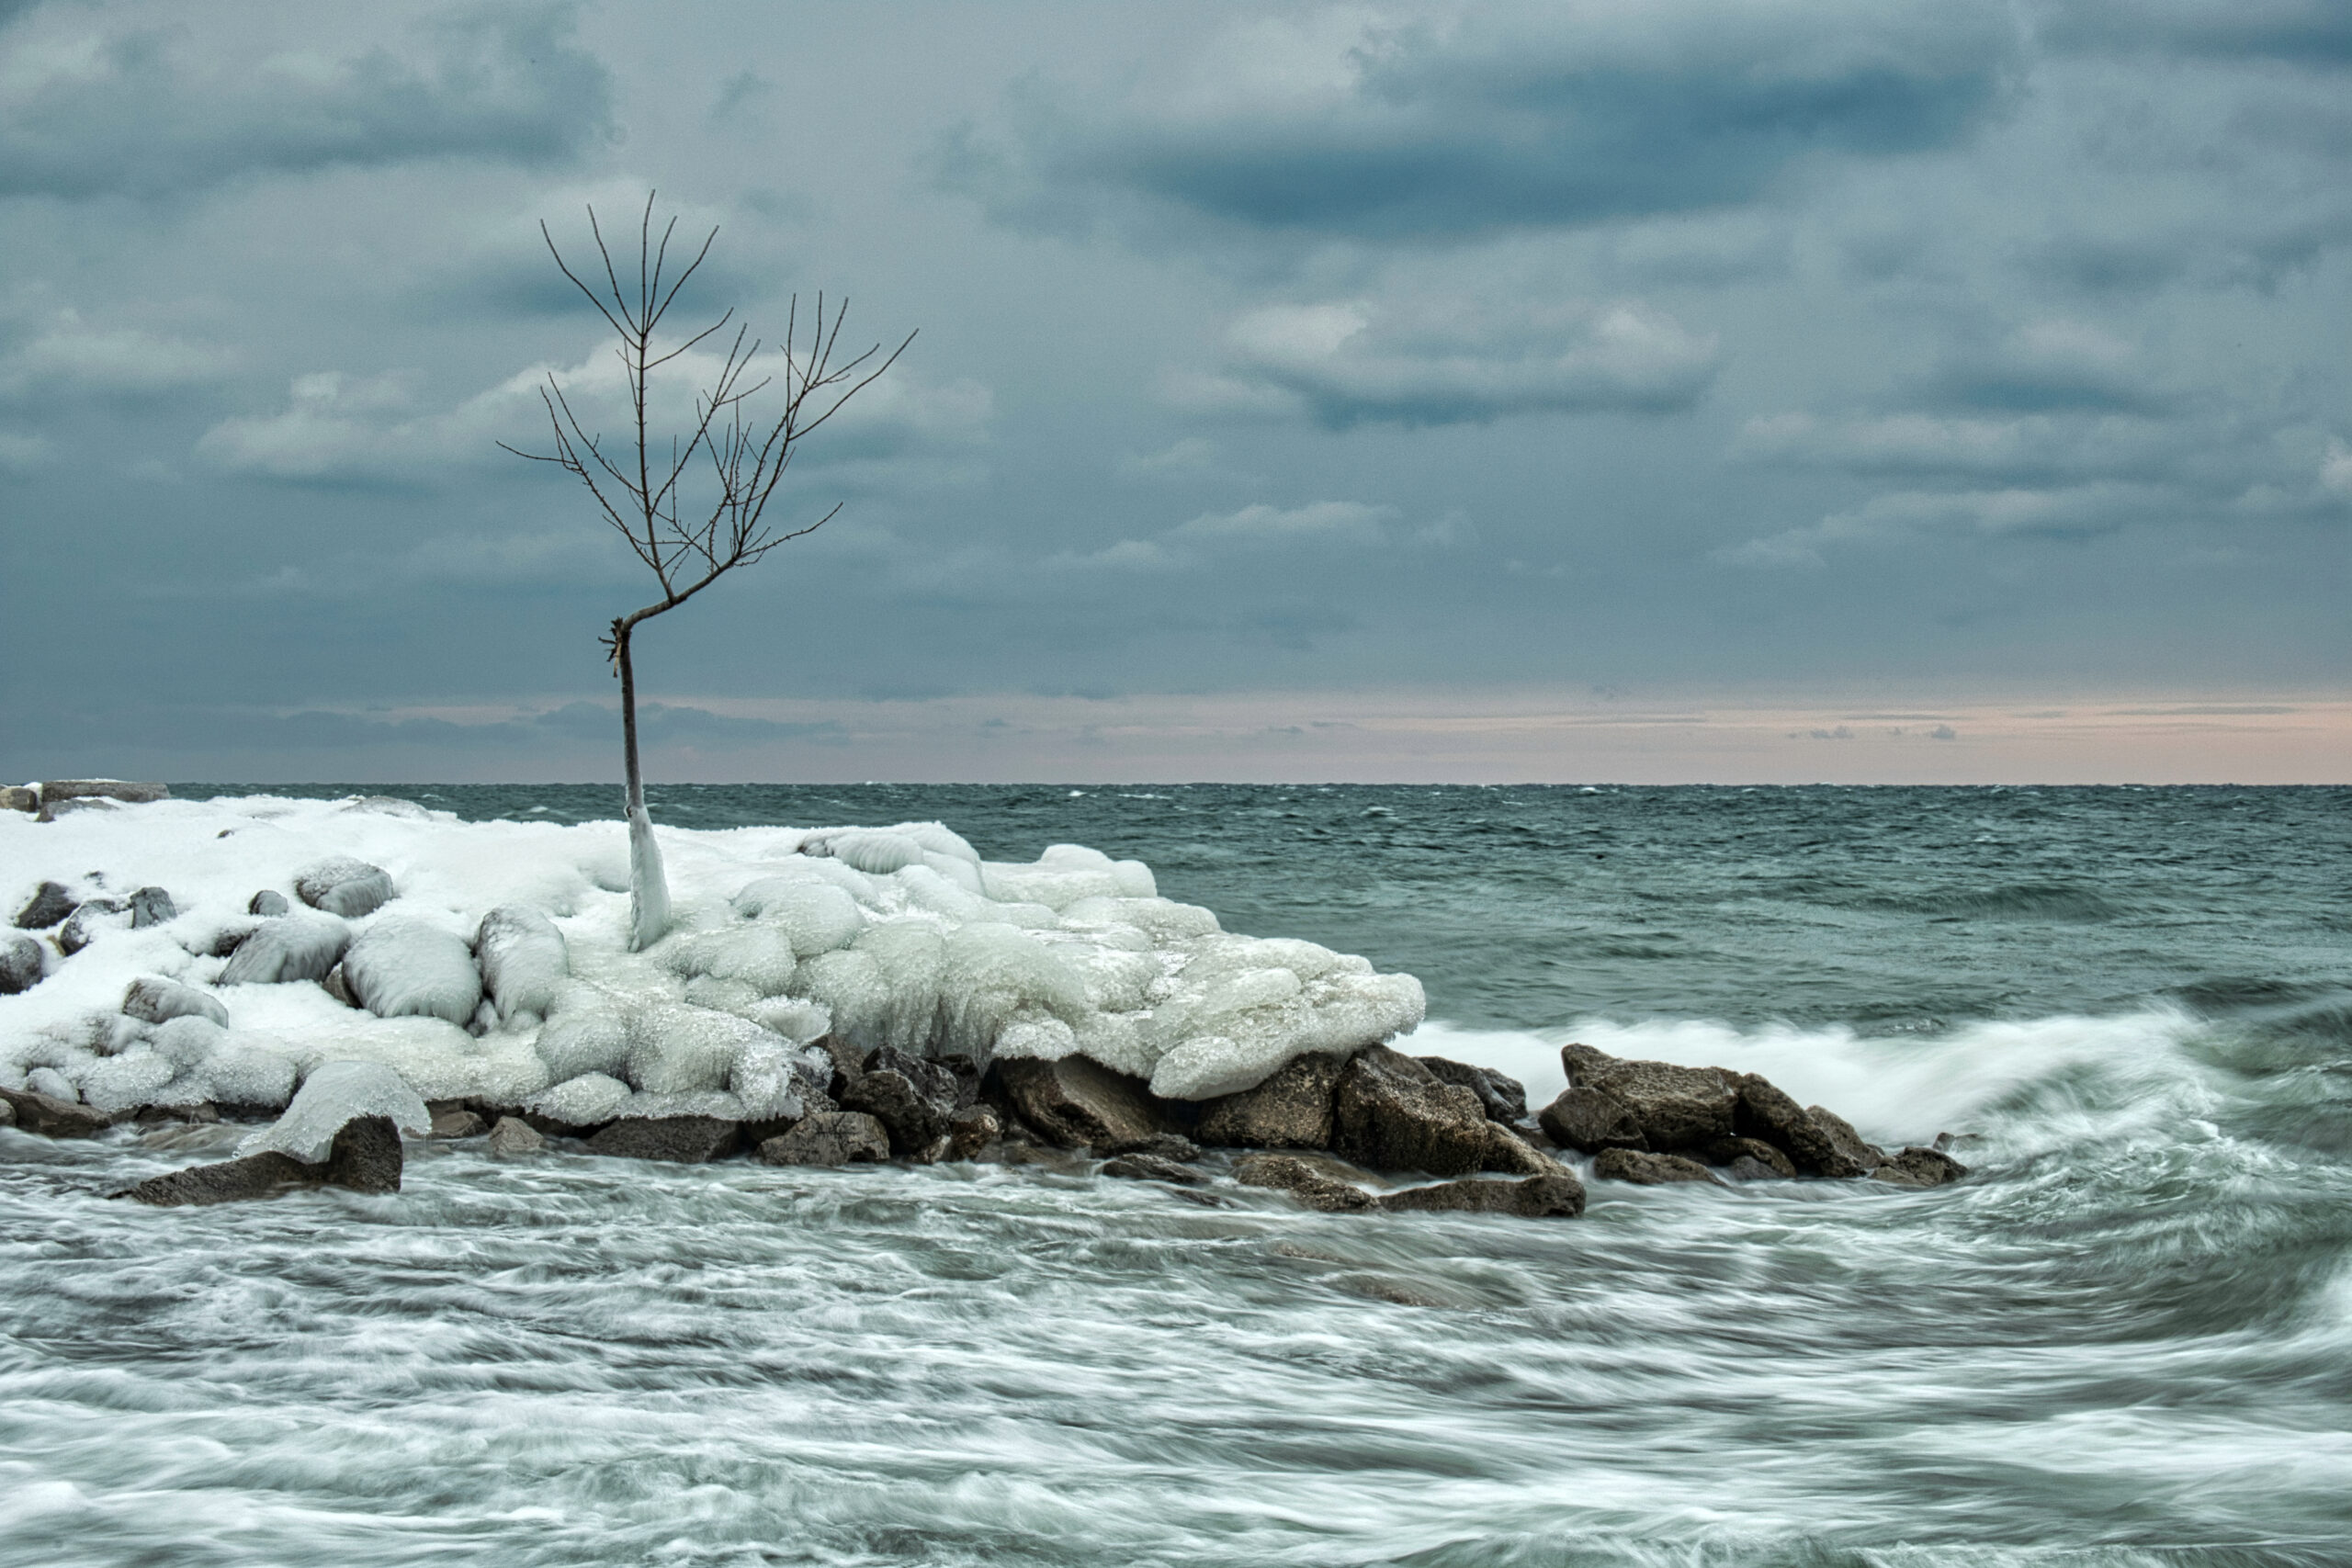 Lake Ontario in the winter